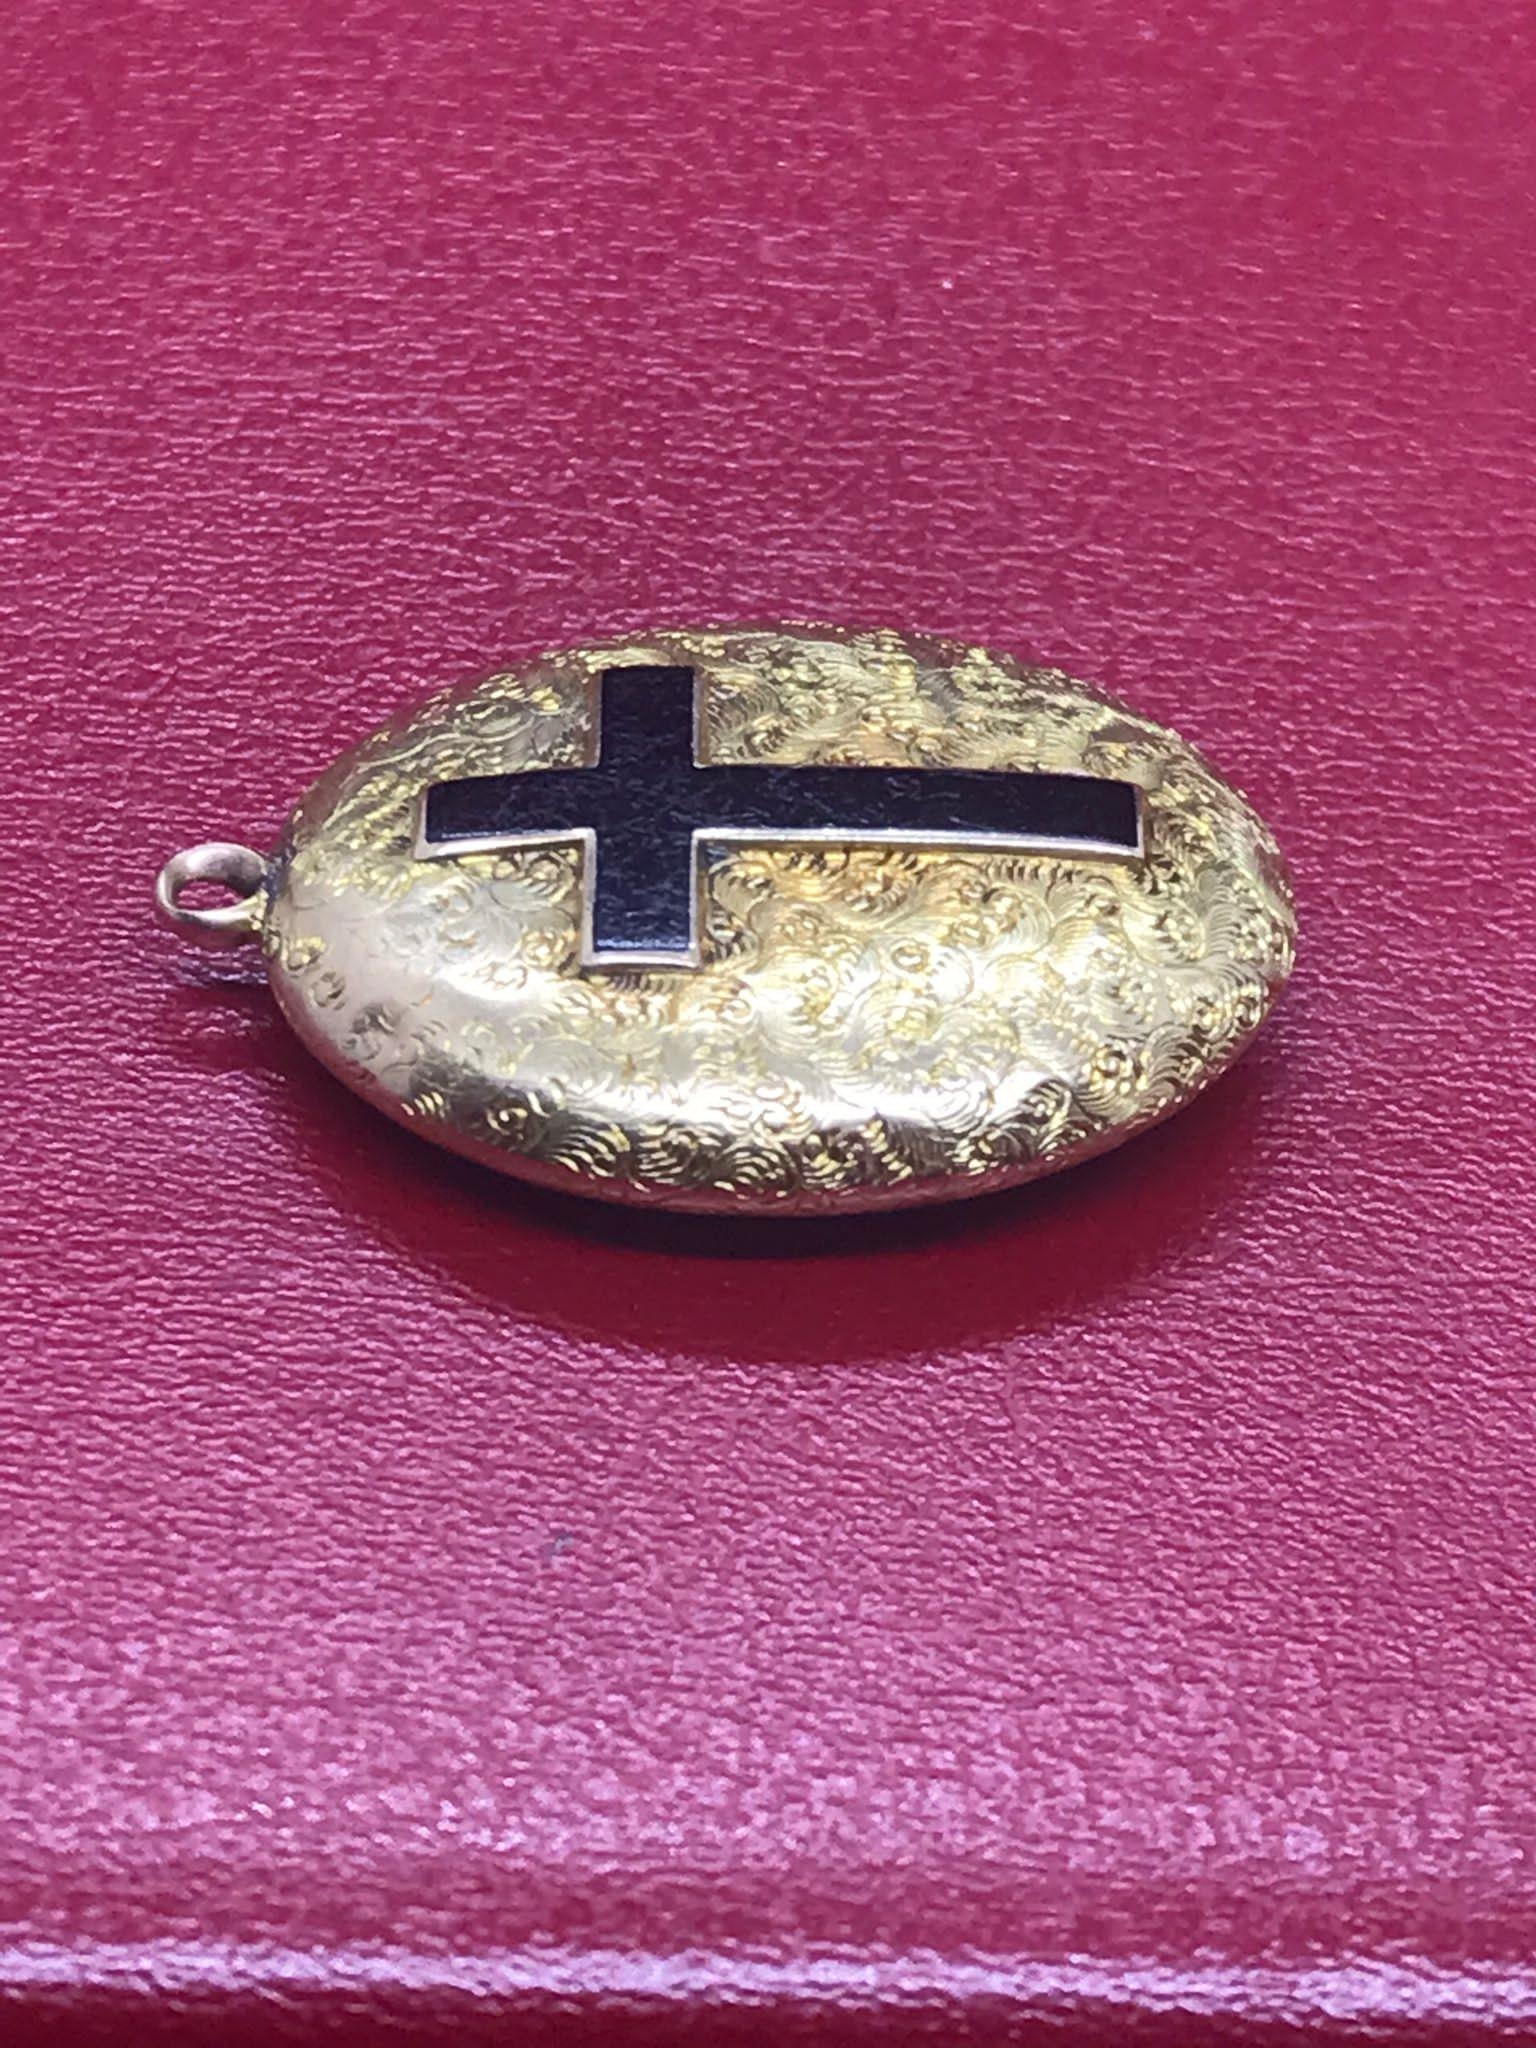 Antique 19th century enamel 15ct gold tested mourning locket pendant 3.1cm BY 2.3cm 4 grams - Image 7 of 12